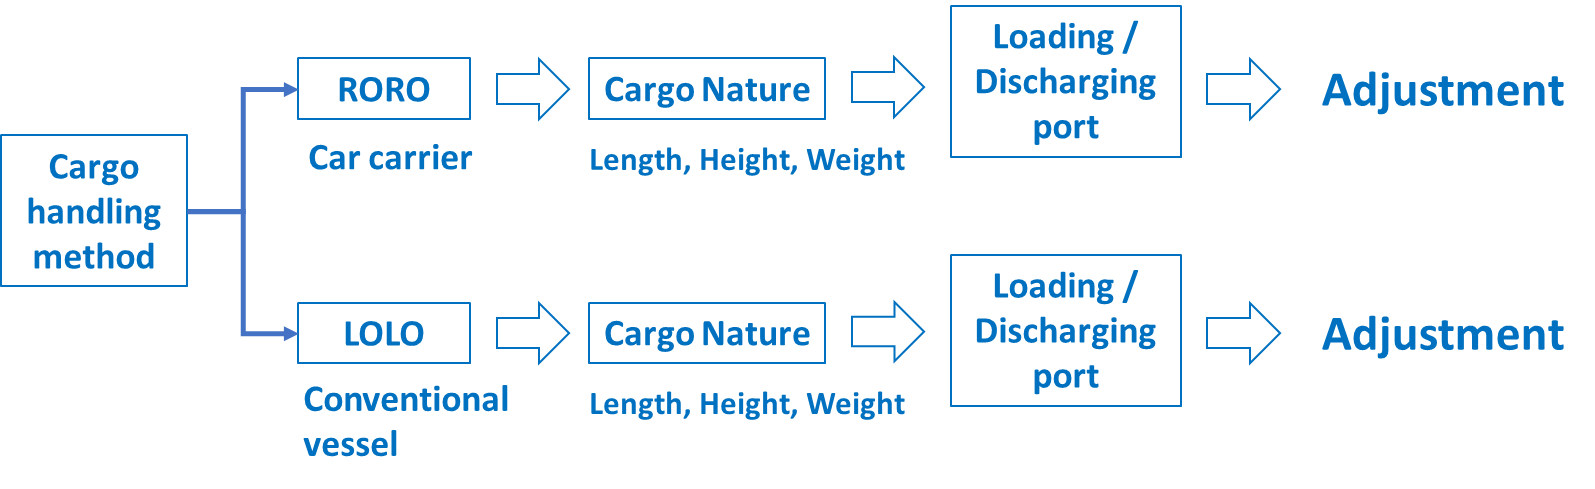 RoRo or LoLo? Different Loading Methods compared